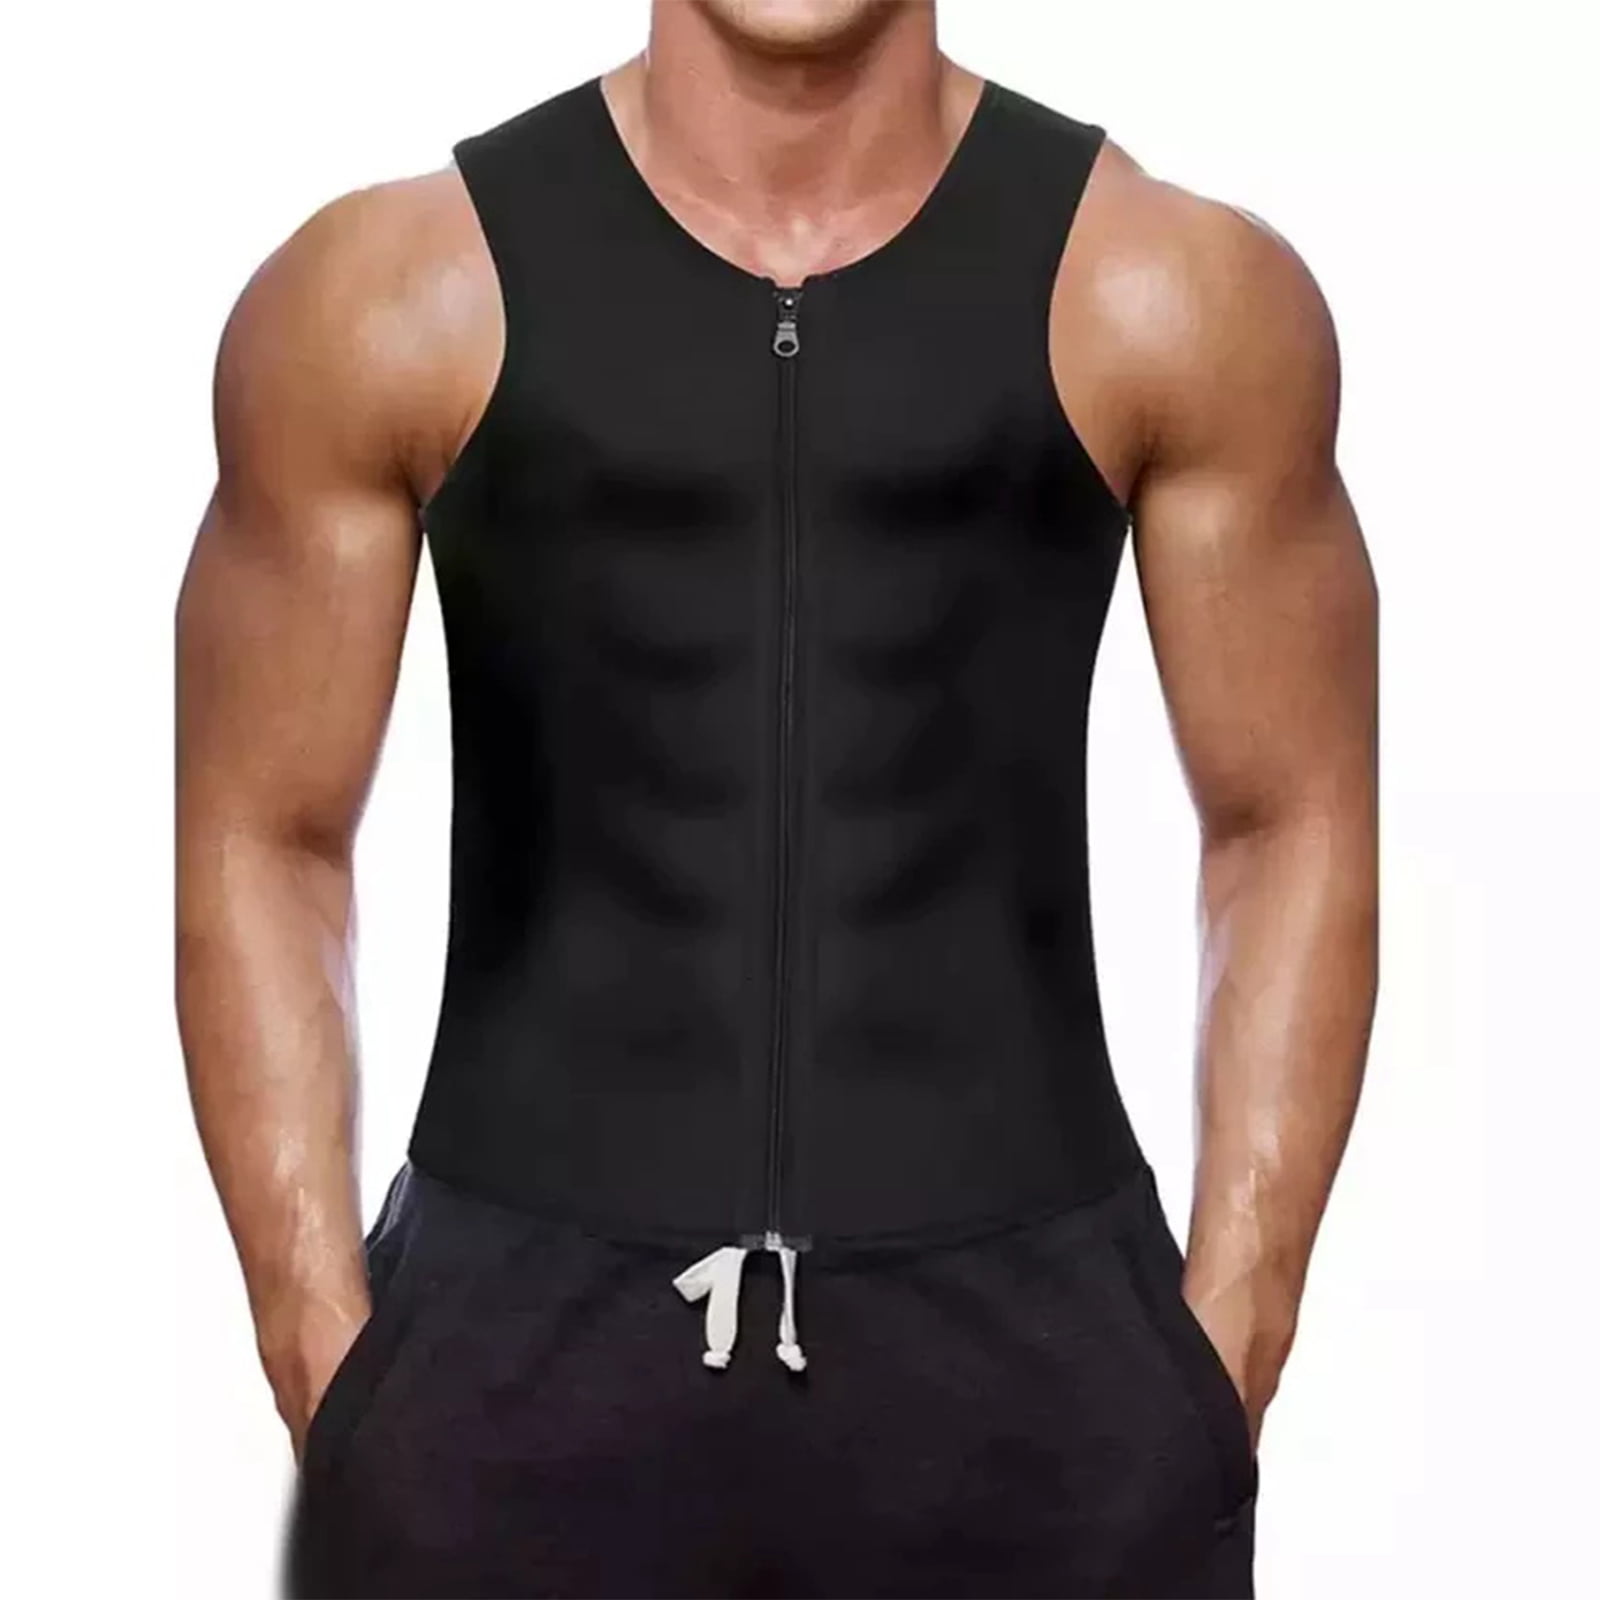 Outdoor Mens Compression Sweat Sauna Suit Workout Weight Loss Slimming Shapewear Hot Body Vest by JM 